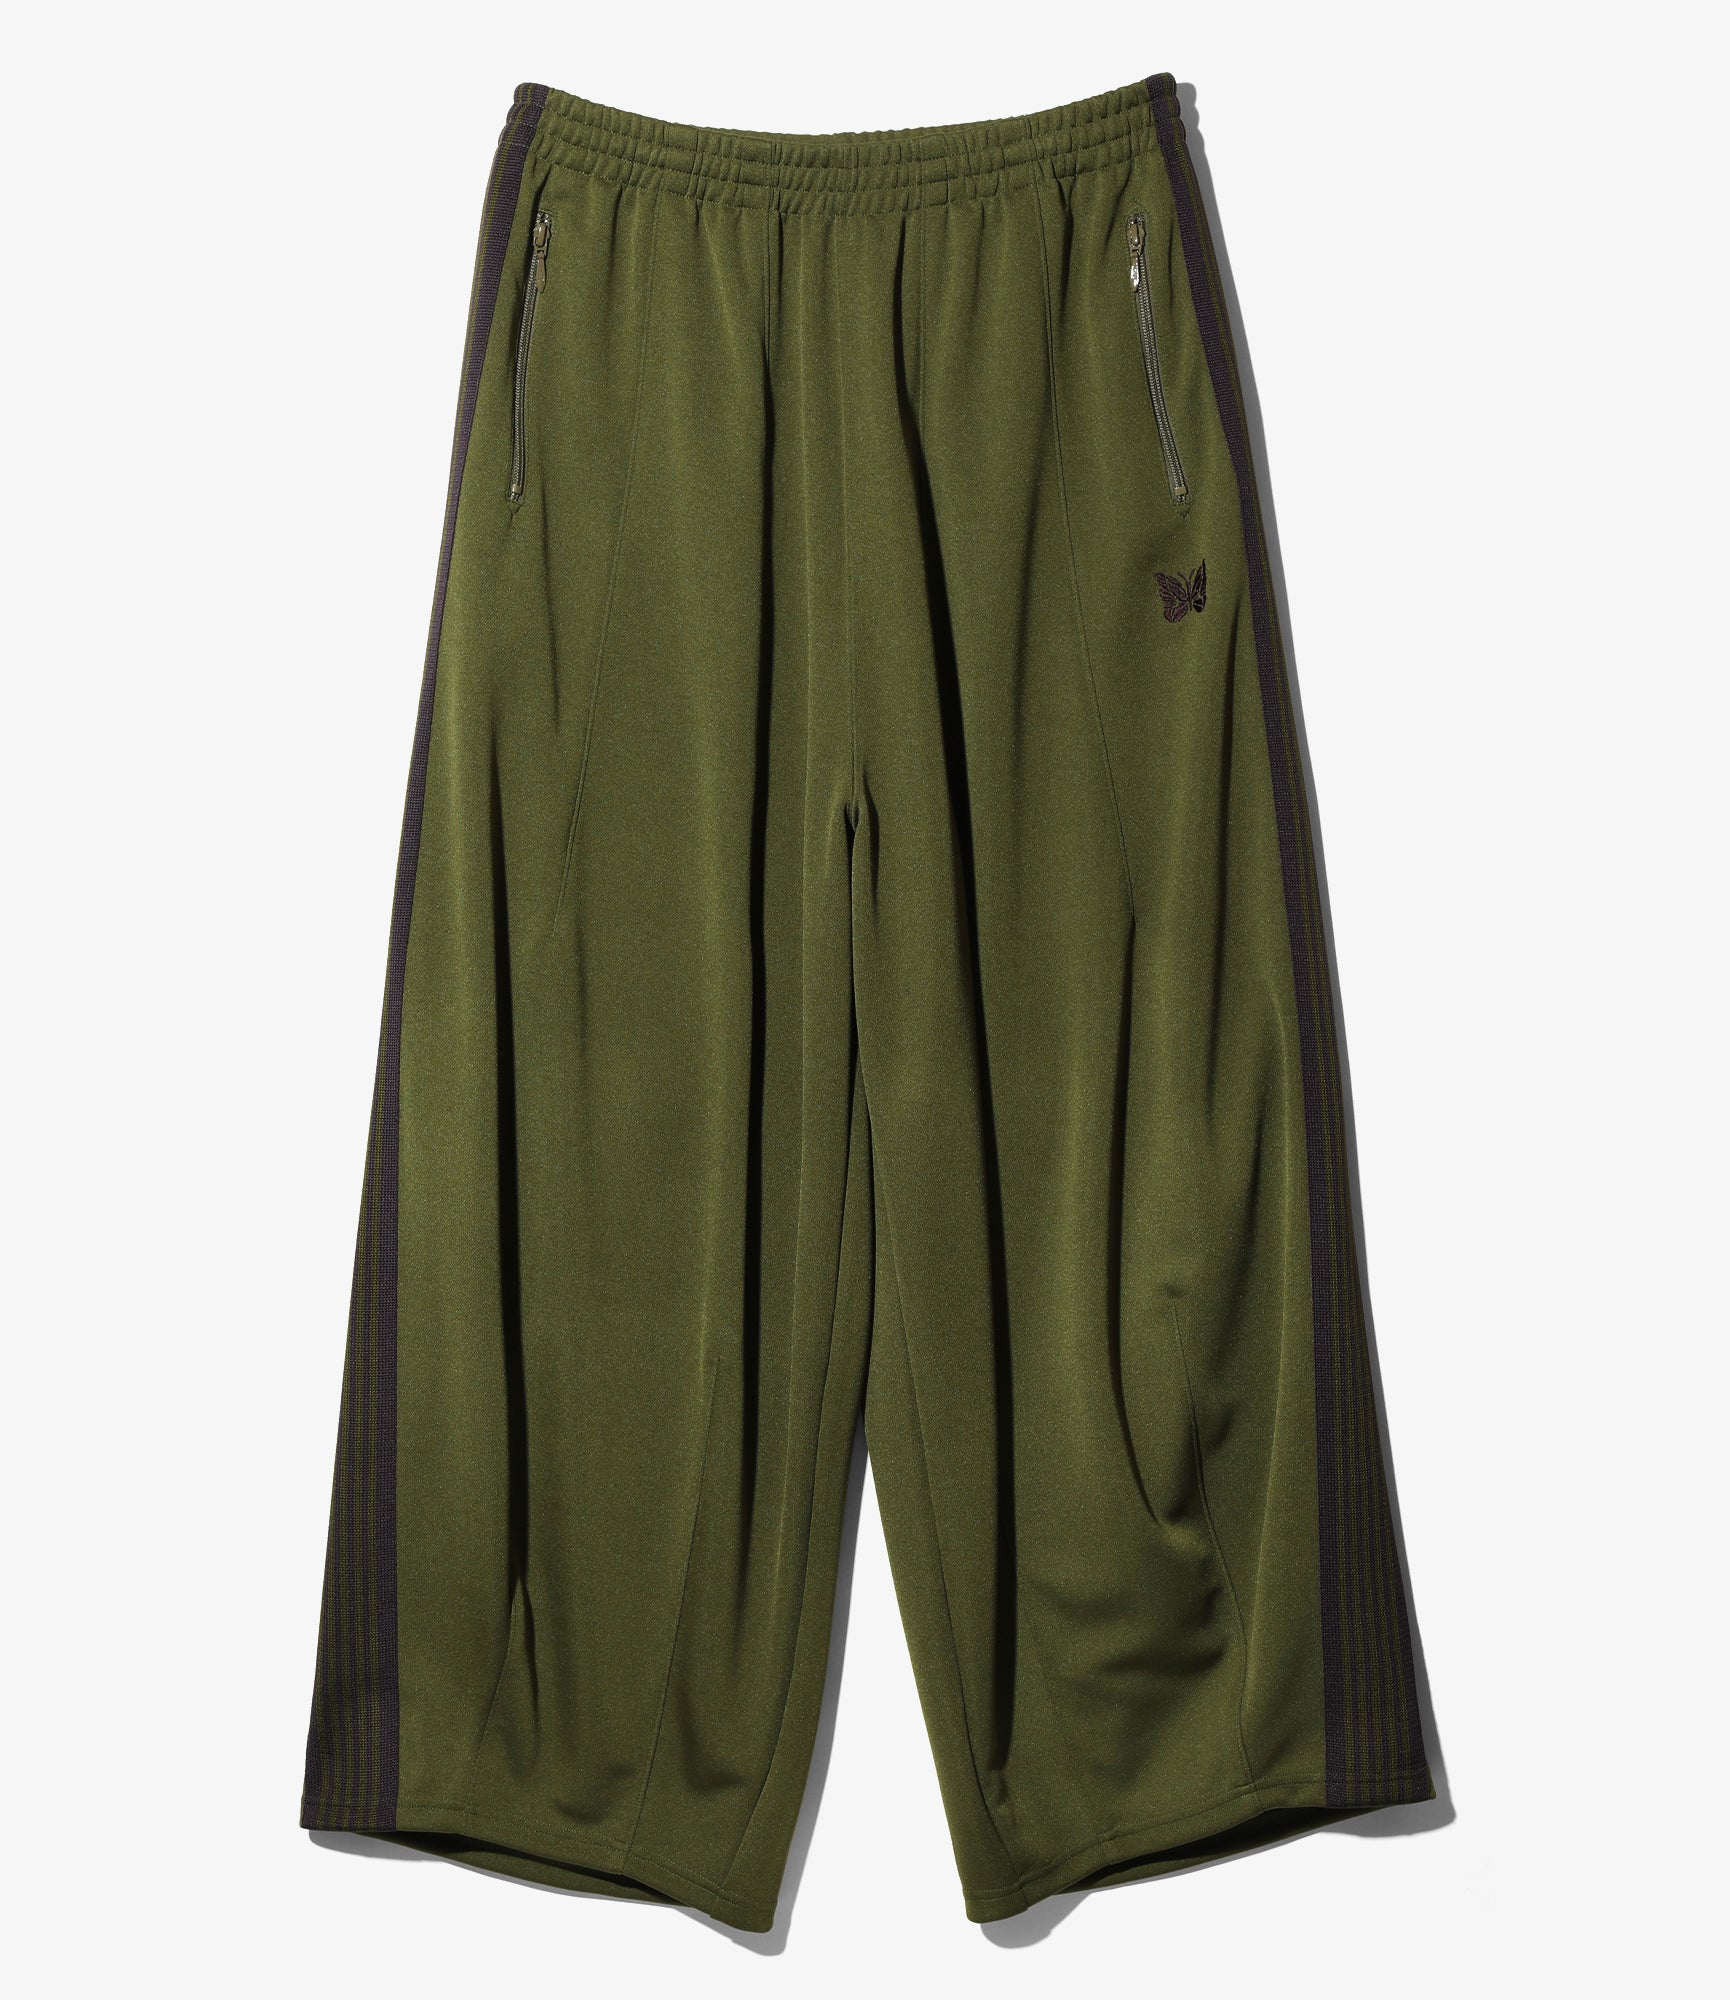 Essentials Track Pants in Olive